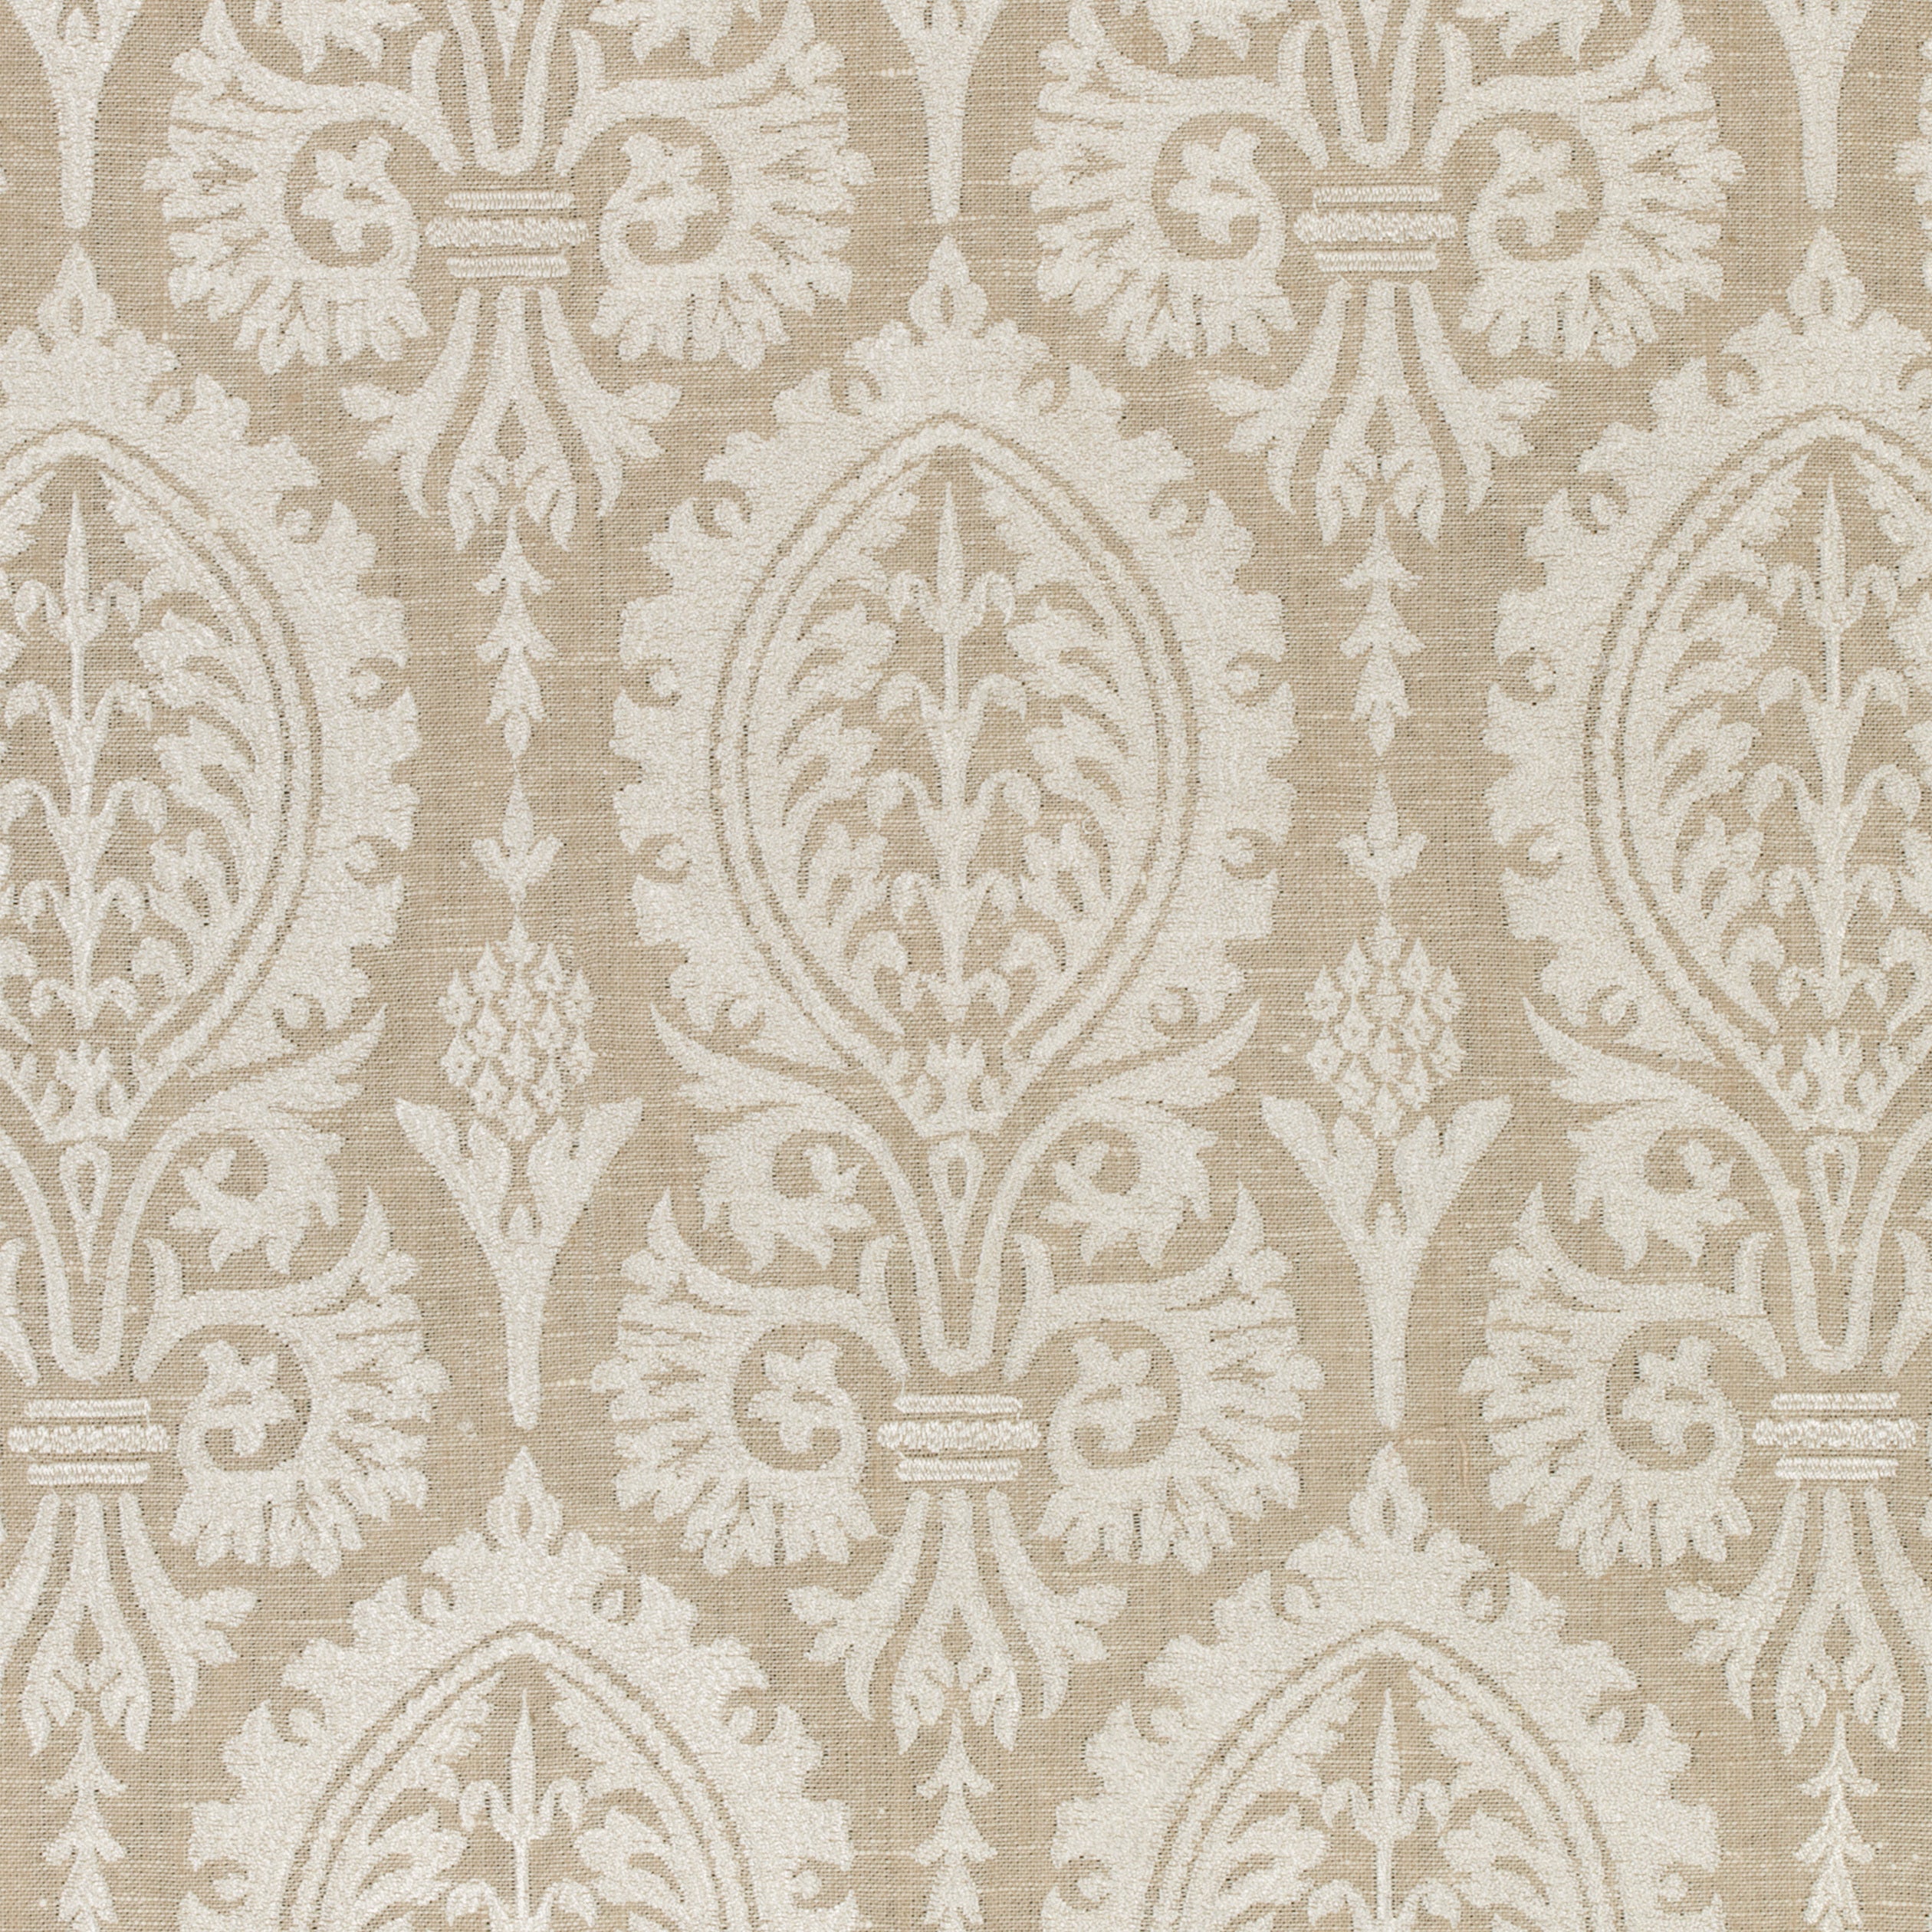 Sir Thomas Embroidery fabric in flax color - pattern number W772569 - by Thibaut in the Chestnut Hill collection